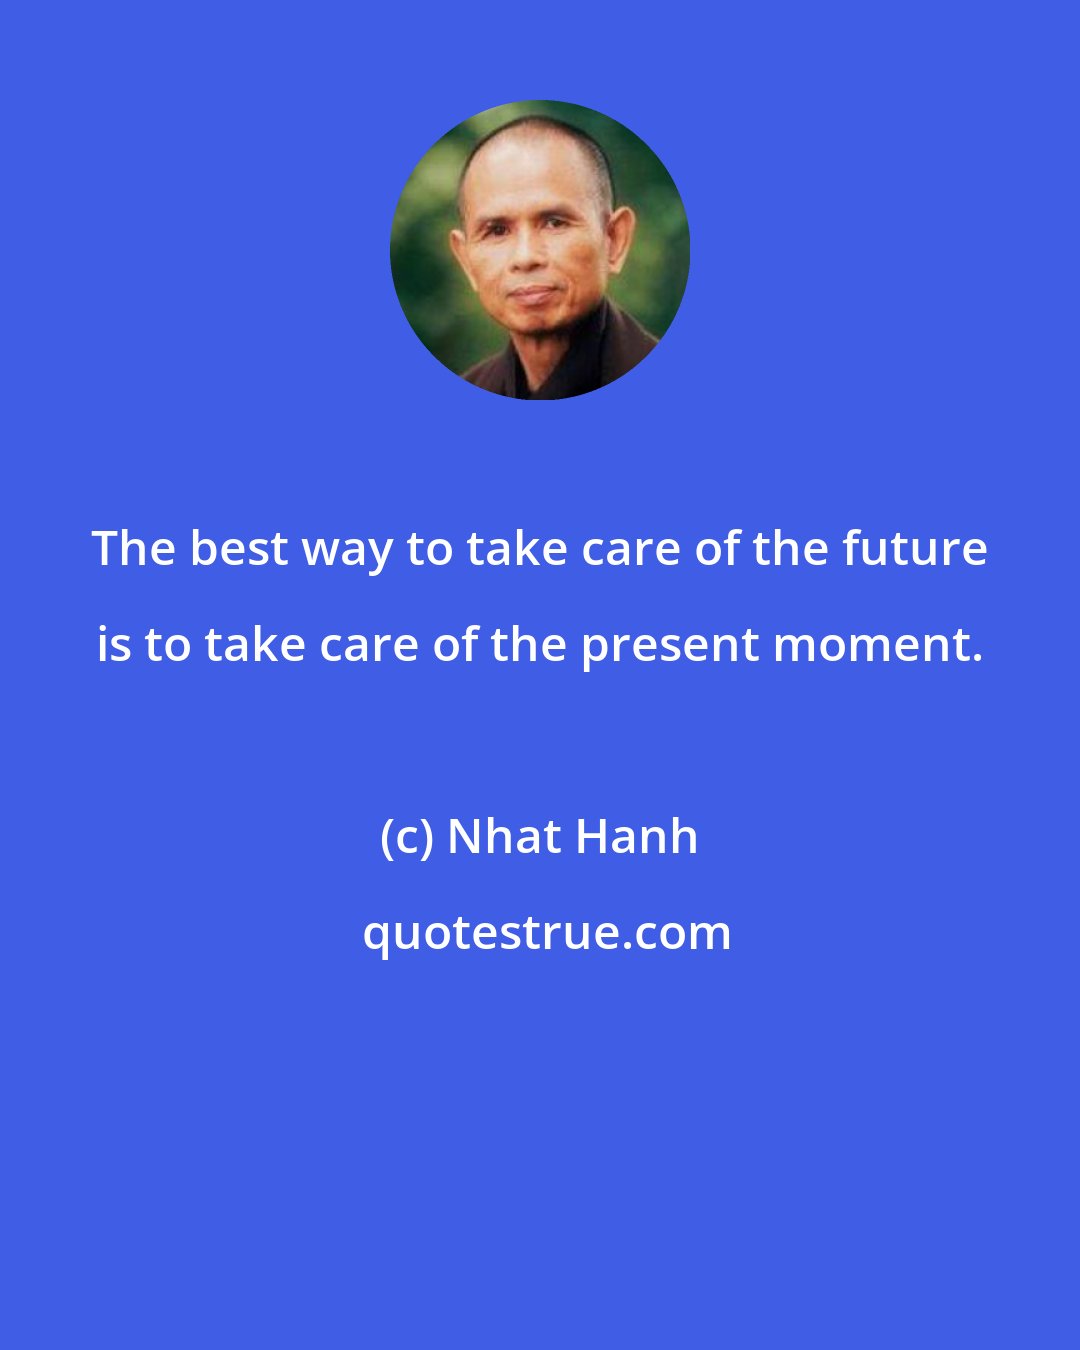 Nhat Hanh: The best way to take care of the future is to take care of the present moment.